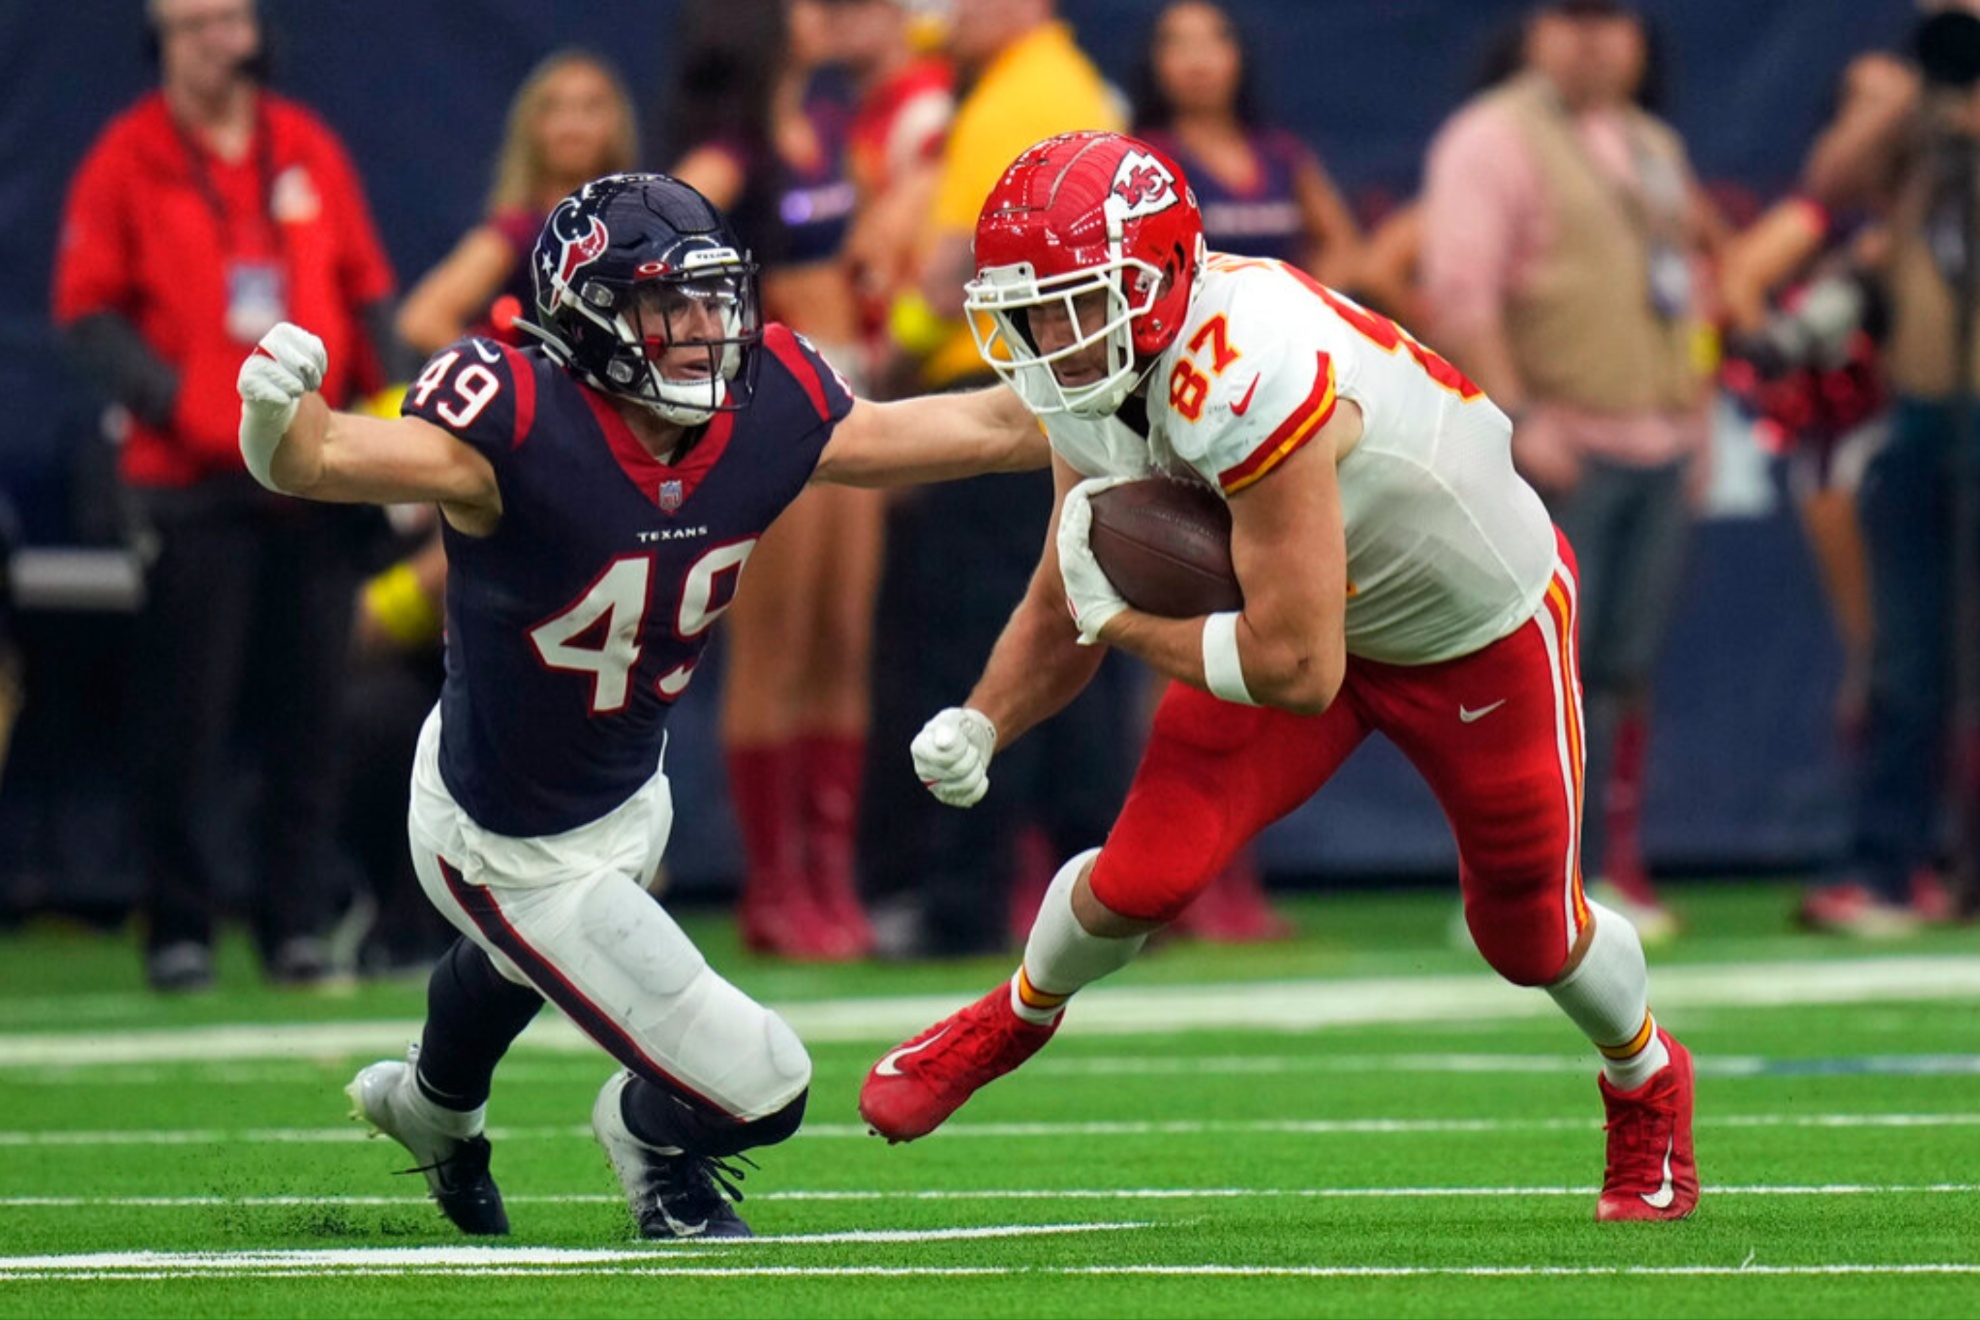 The Houston Texans will pose a serious threat for the Kansas City Chiefs in the AFC